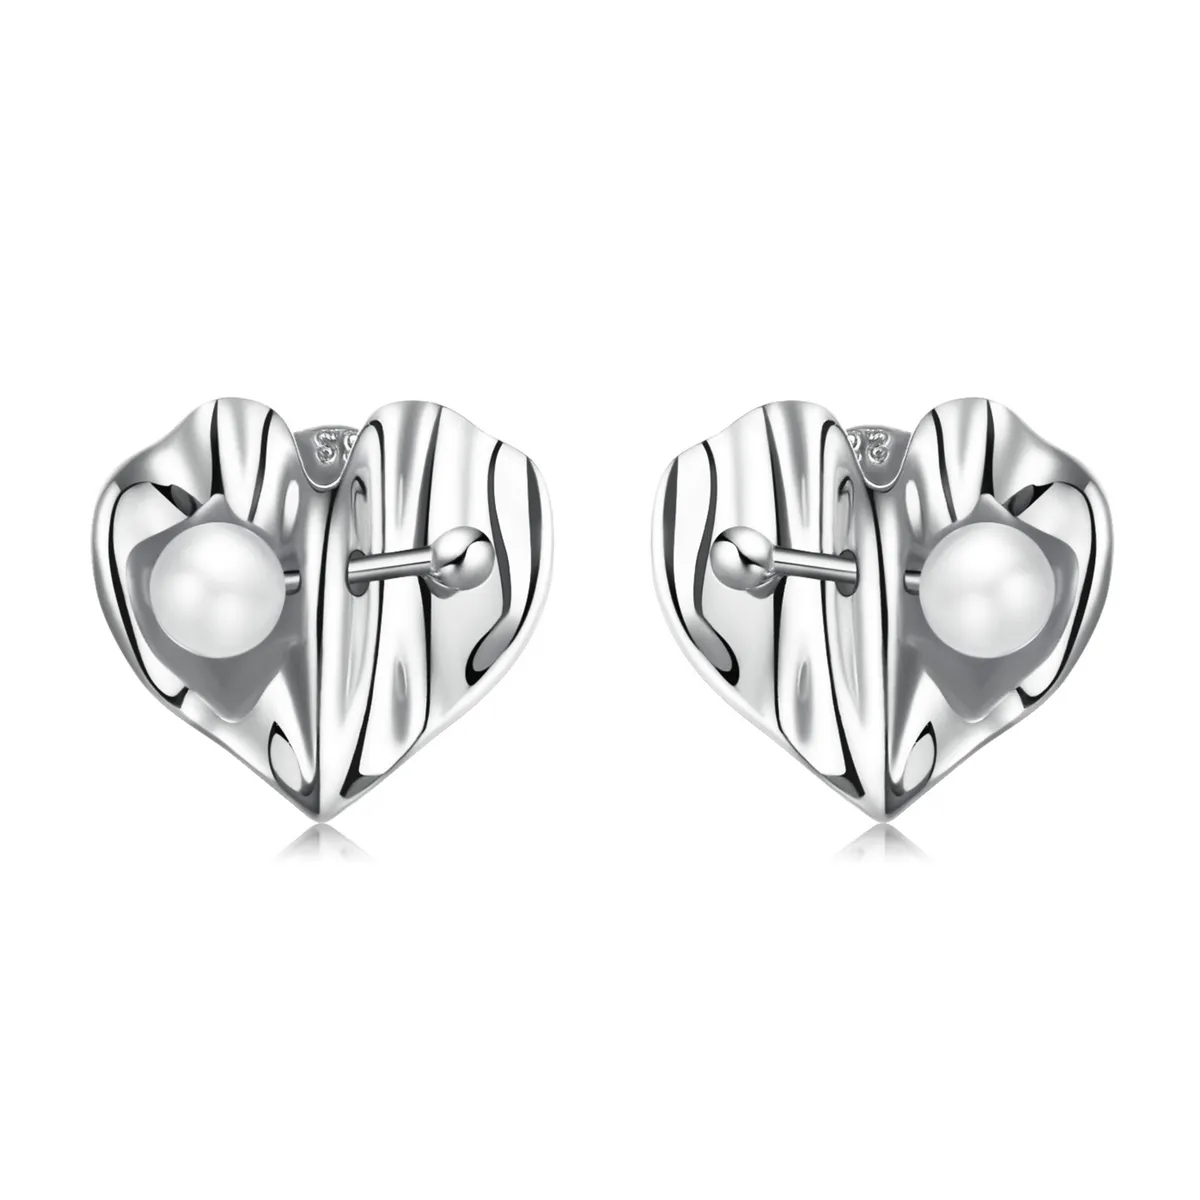 Pandora Style Love Shell Beads - Texture Stud Earrings - BSE551-A